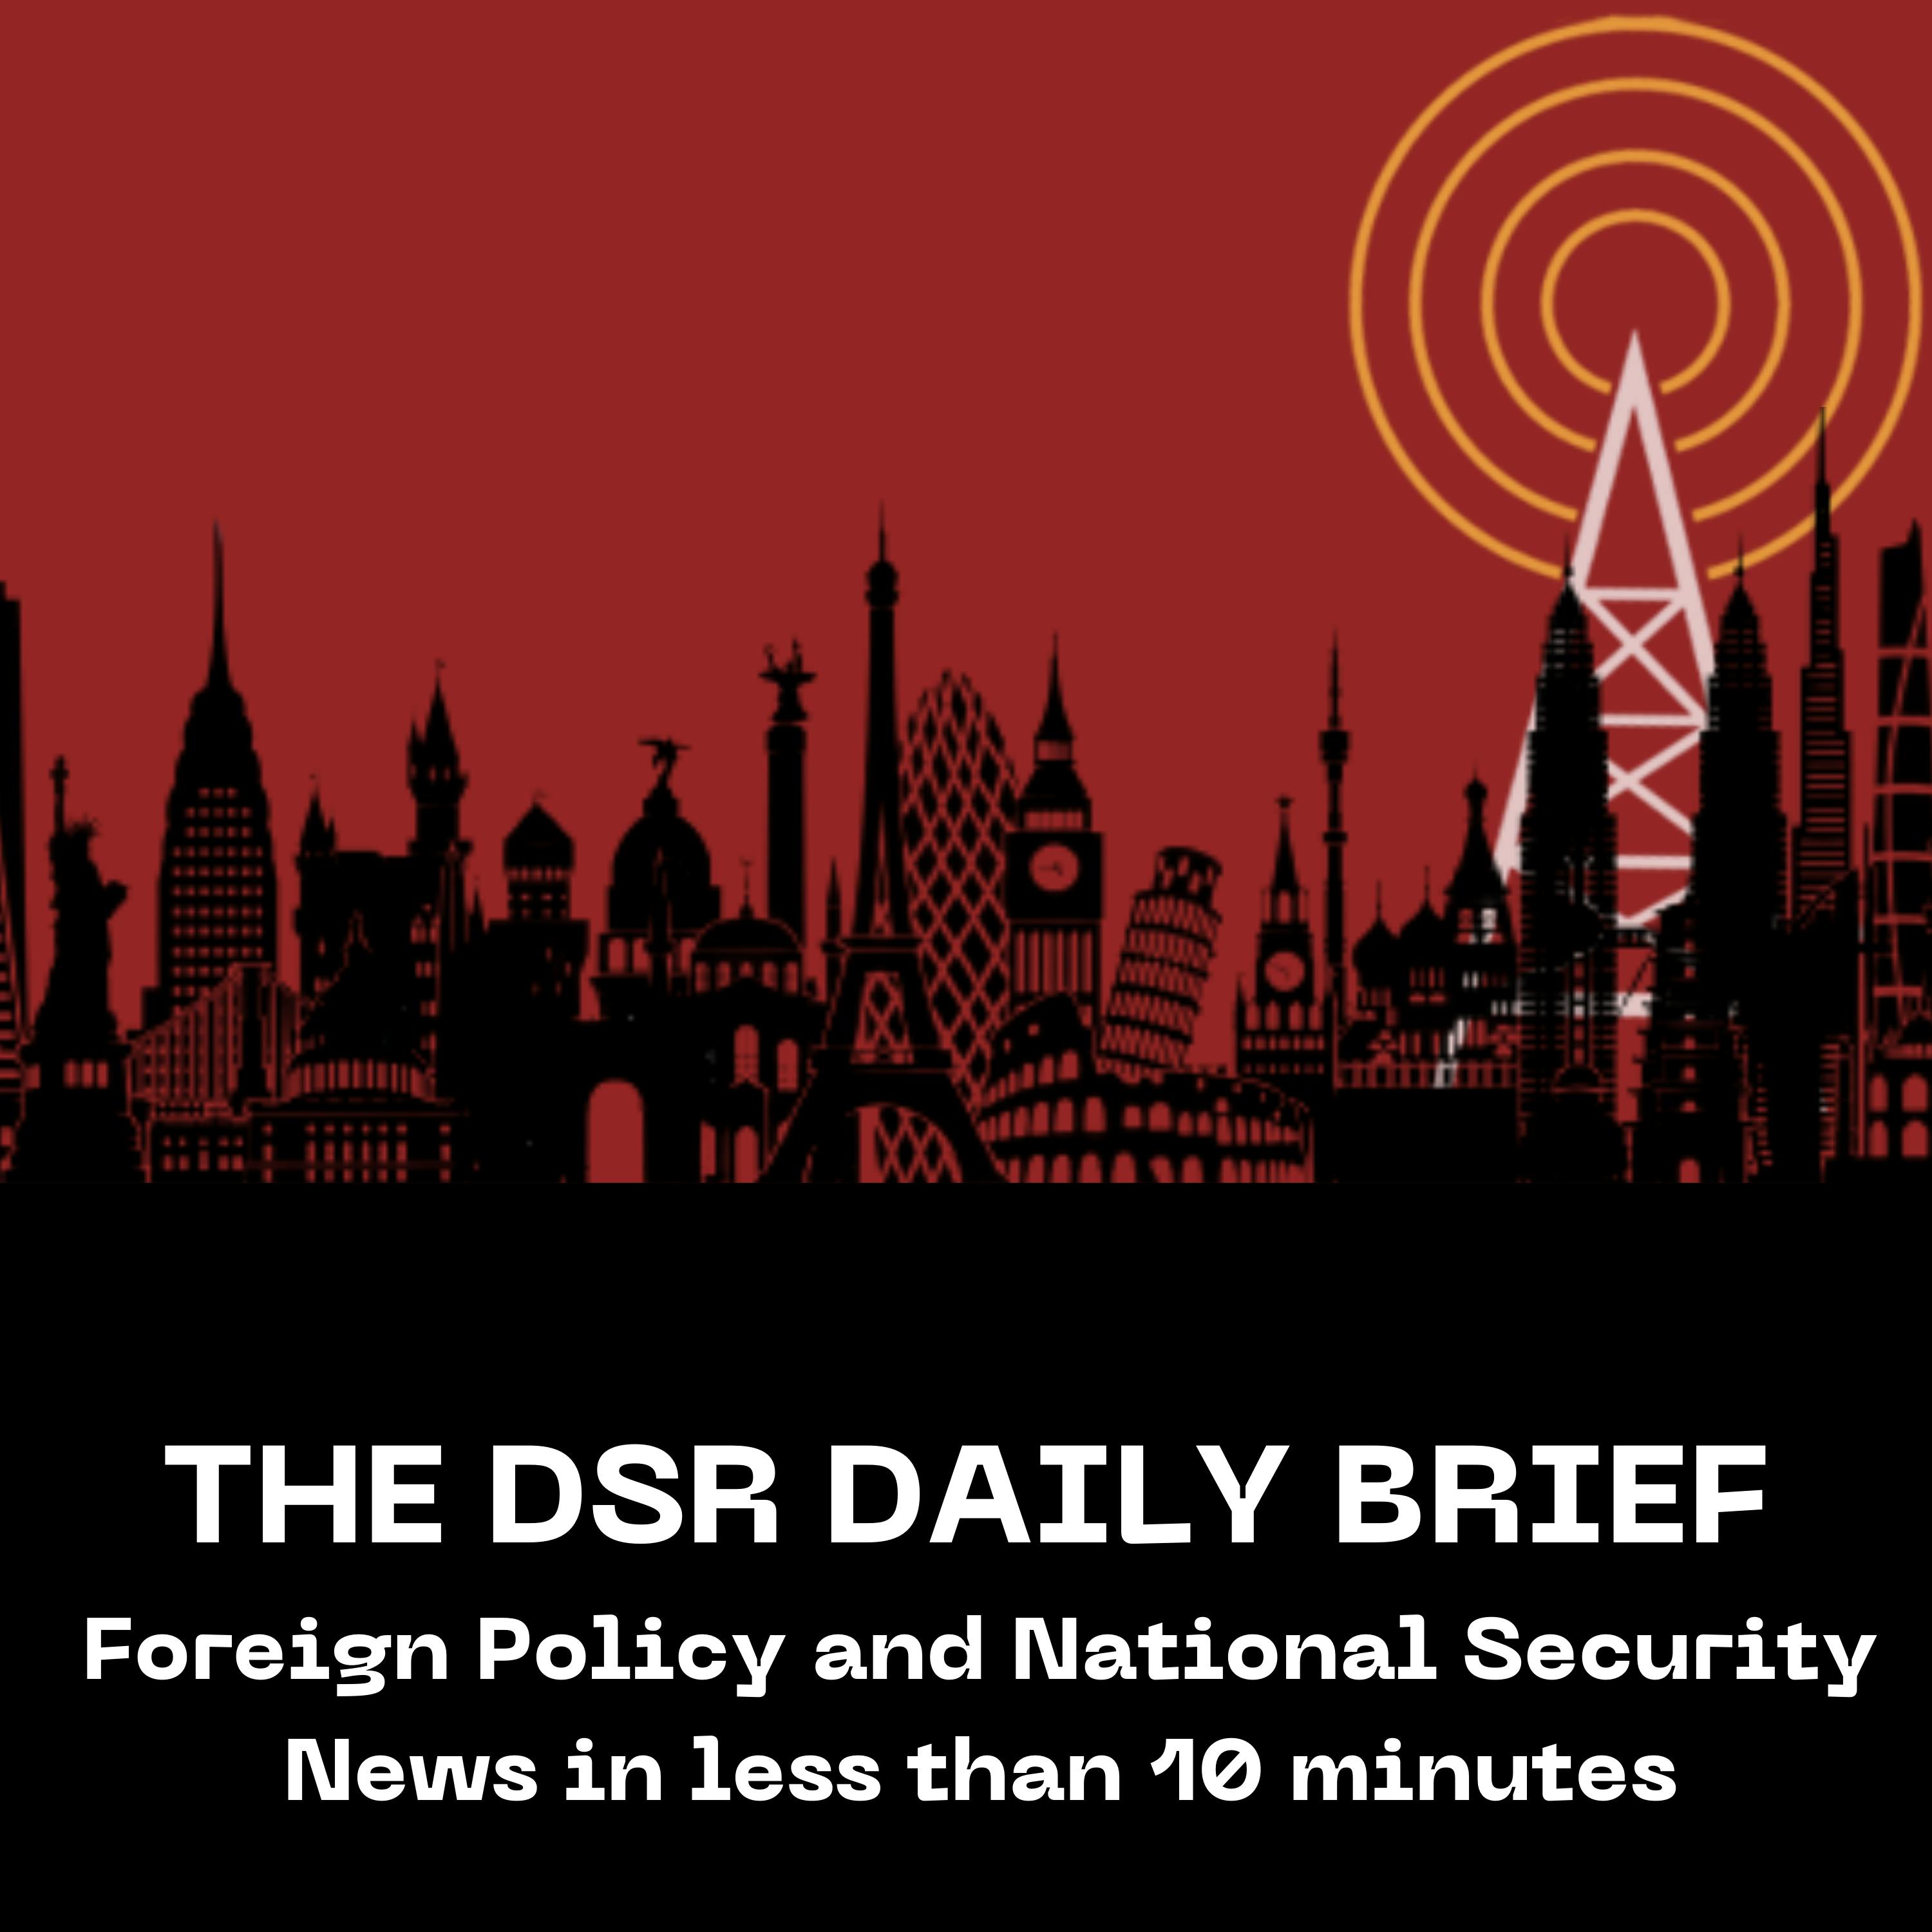 The DSR Daily for April 4: Judge Rejects Trump’s Trial Delay, Aid Groups Halt Work in Gaza